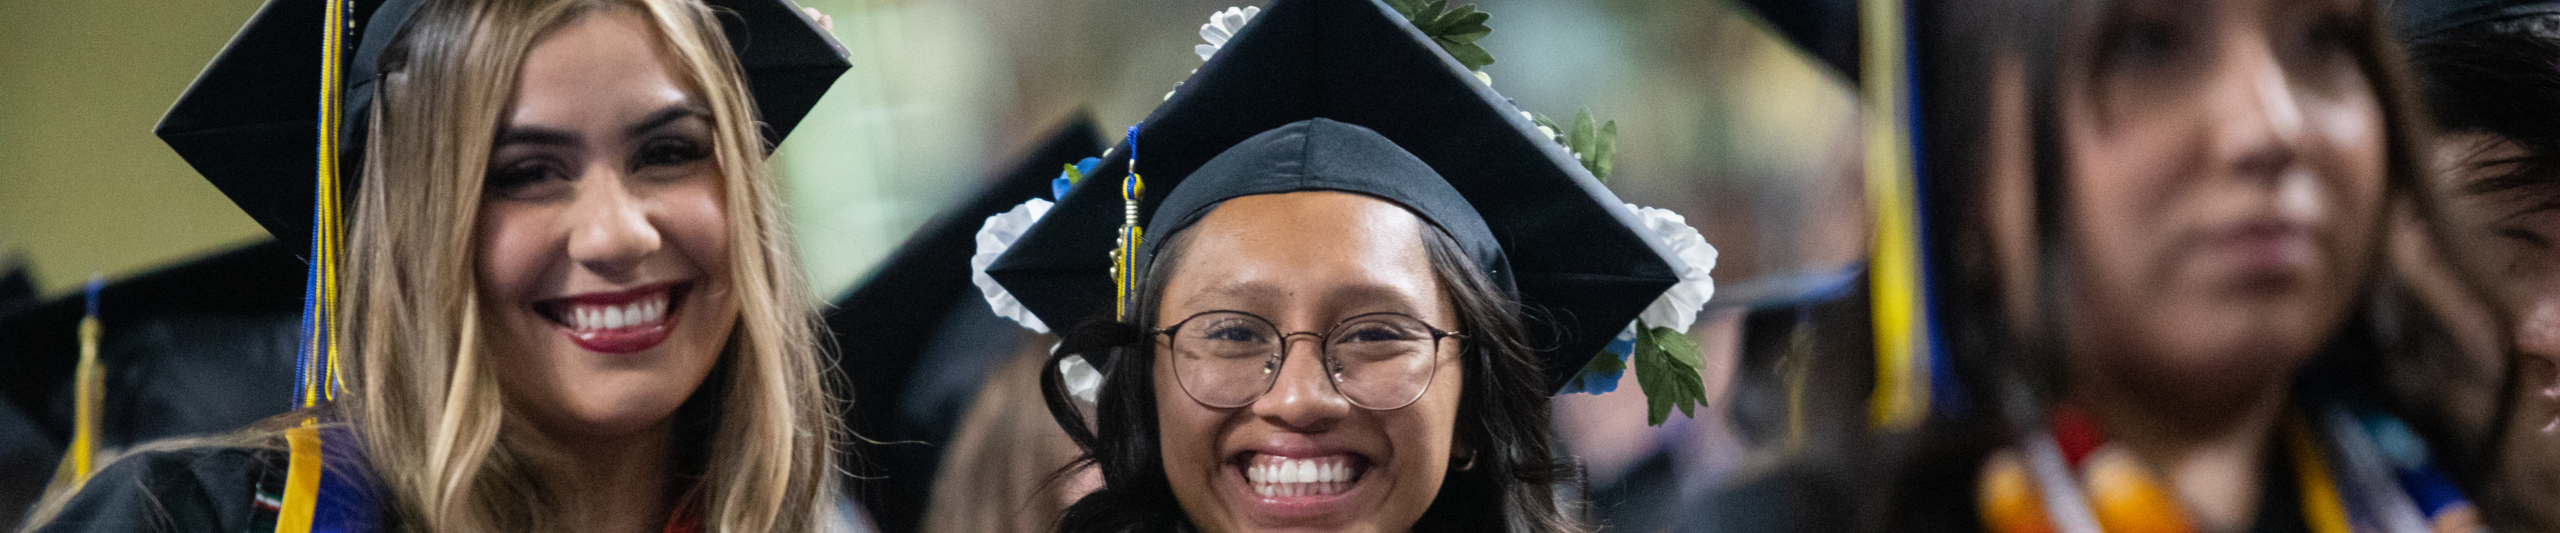 Graduates looking happy during Heritage University commencement